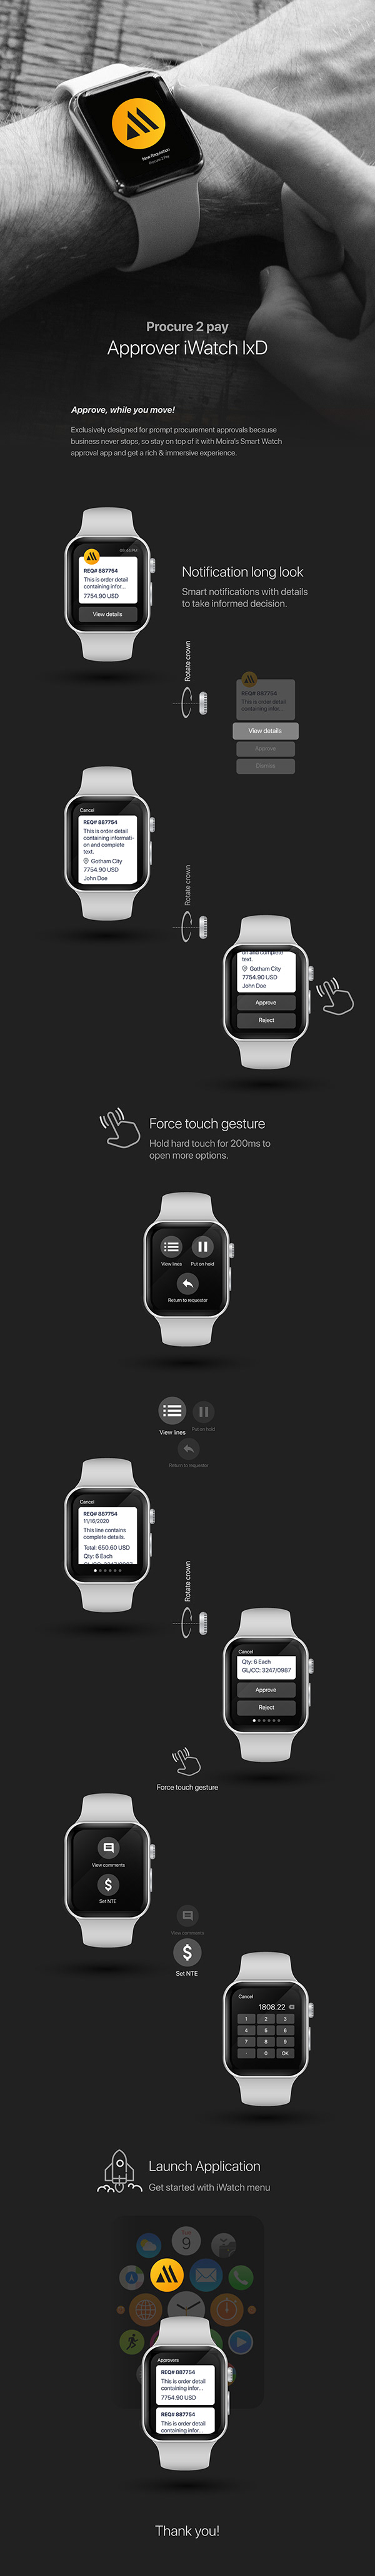 Procure to Pay - Approver’s iWatch App